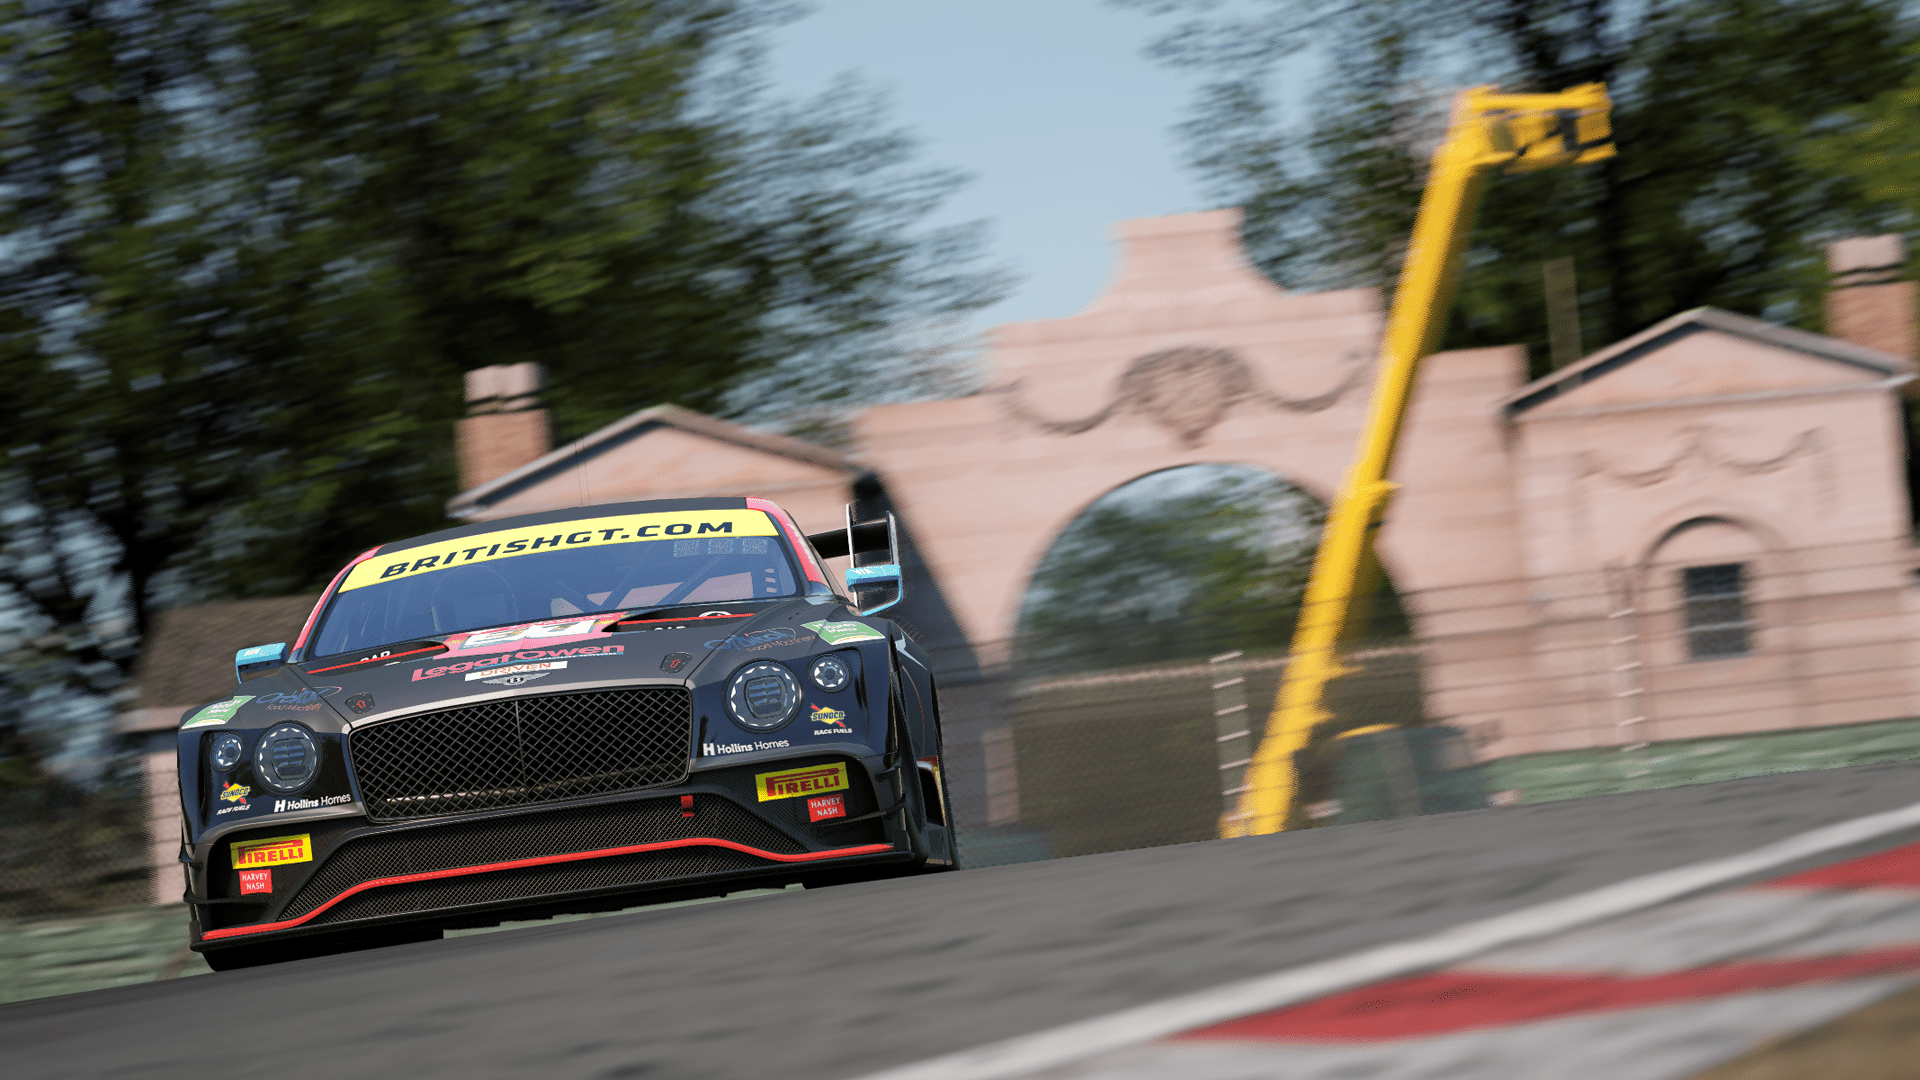 Assetto Corsa Competizione Speeds onto PlayStation 5, Xbox Series